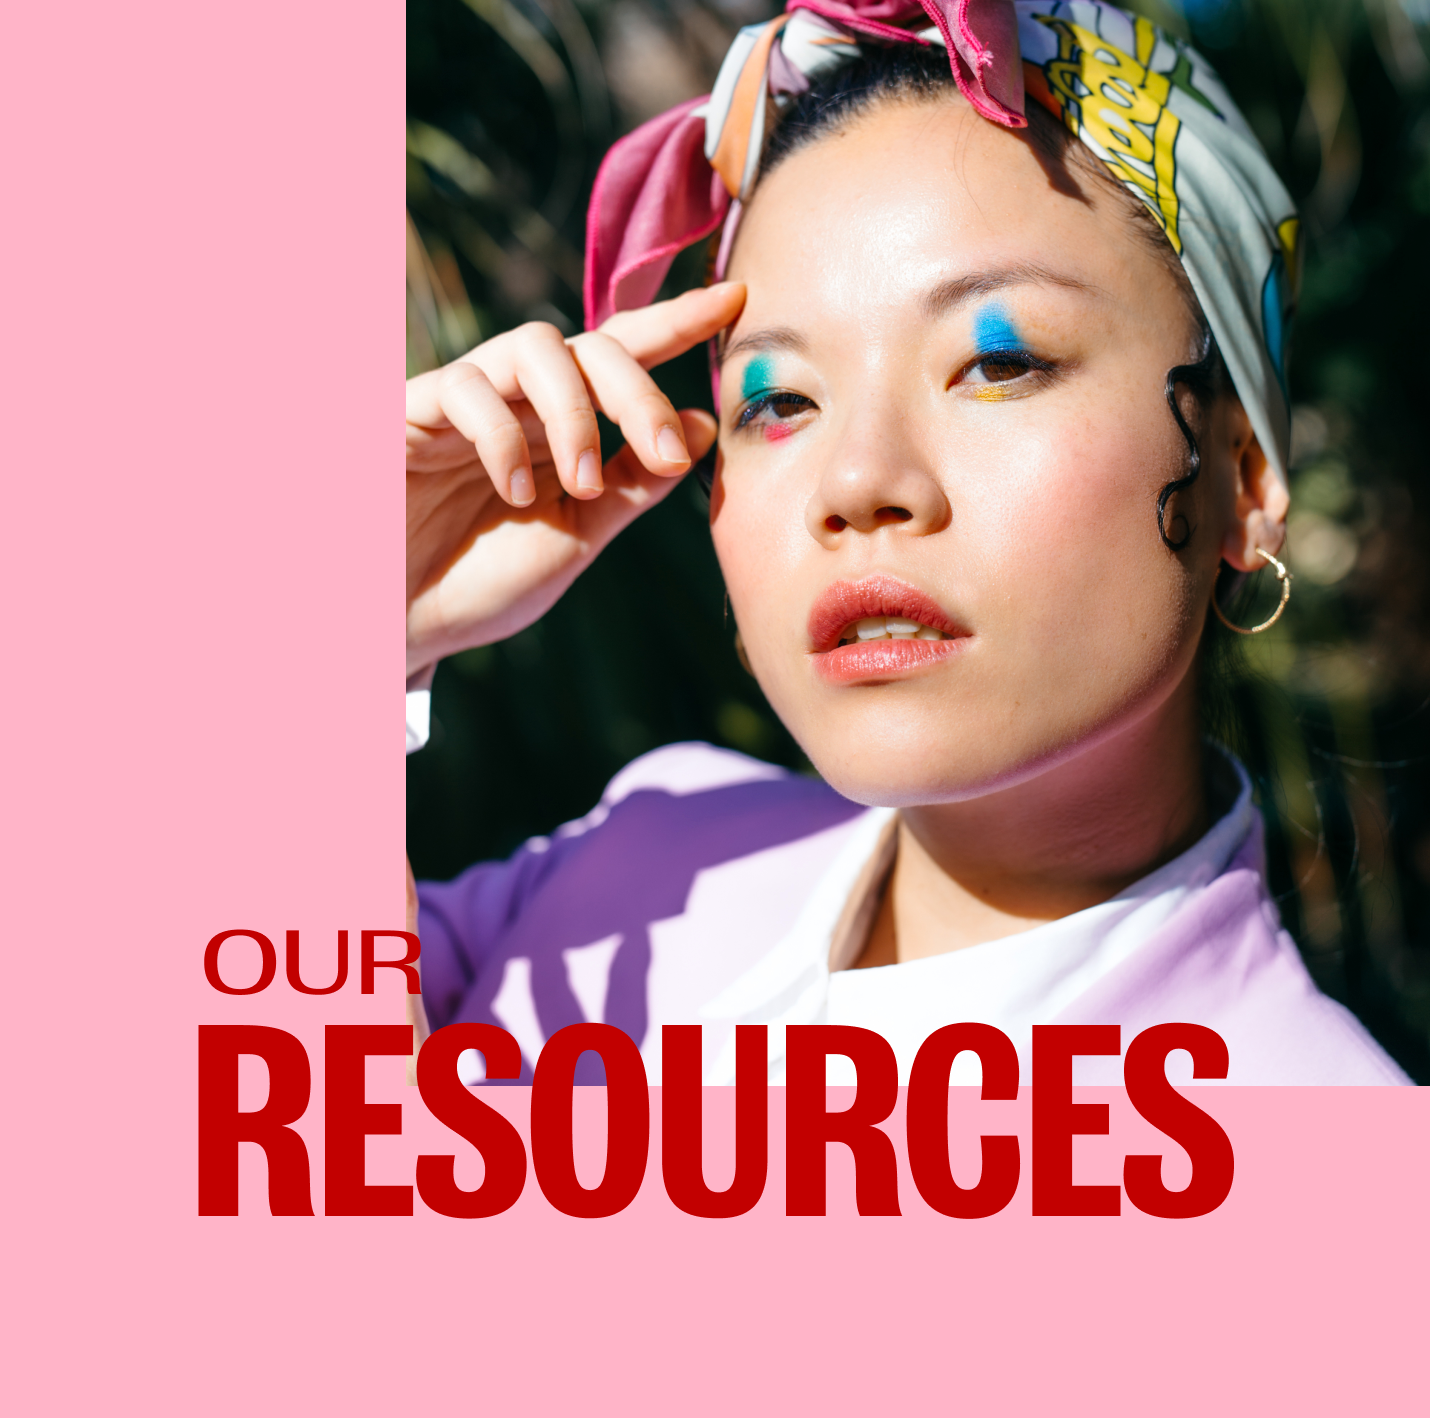 Picture of person and a pink background with "Our resources" overlaid